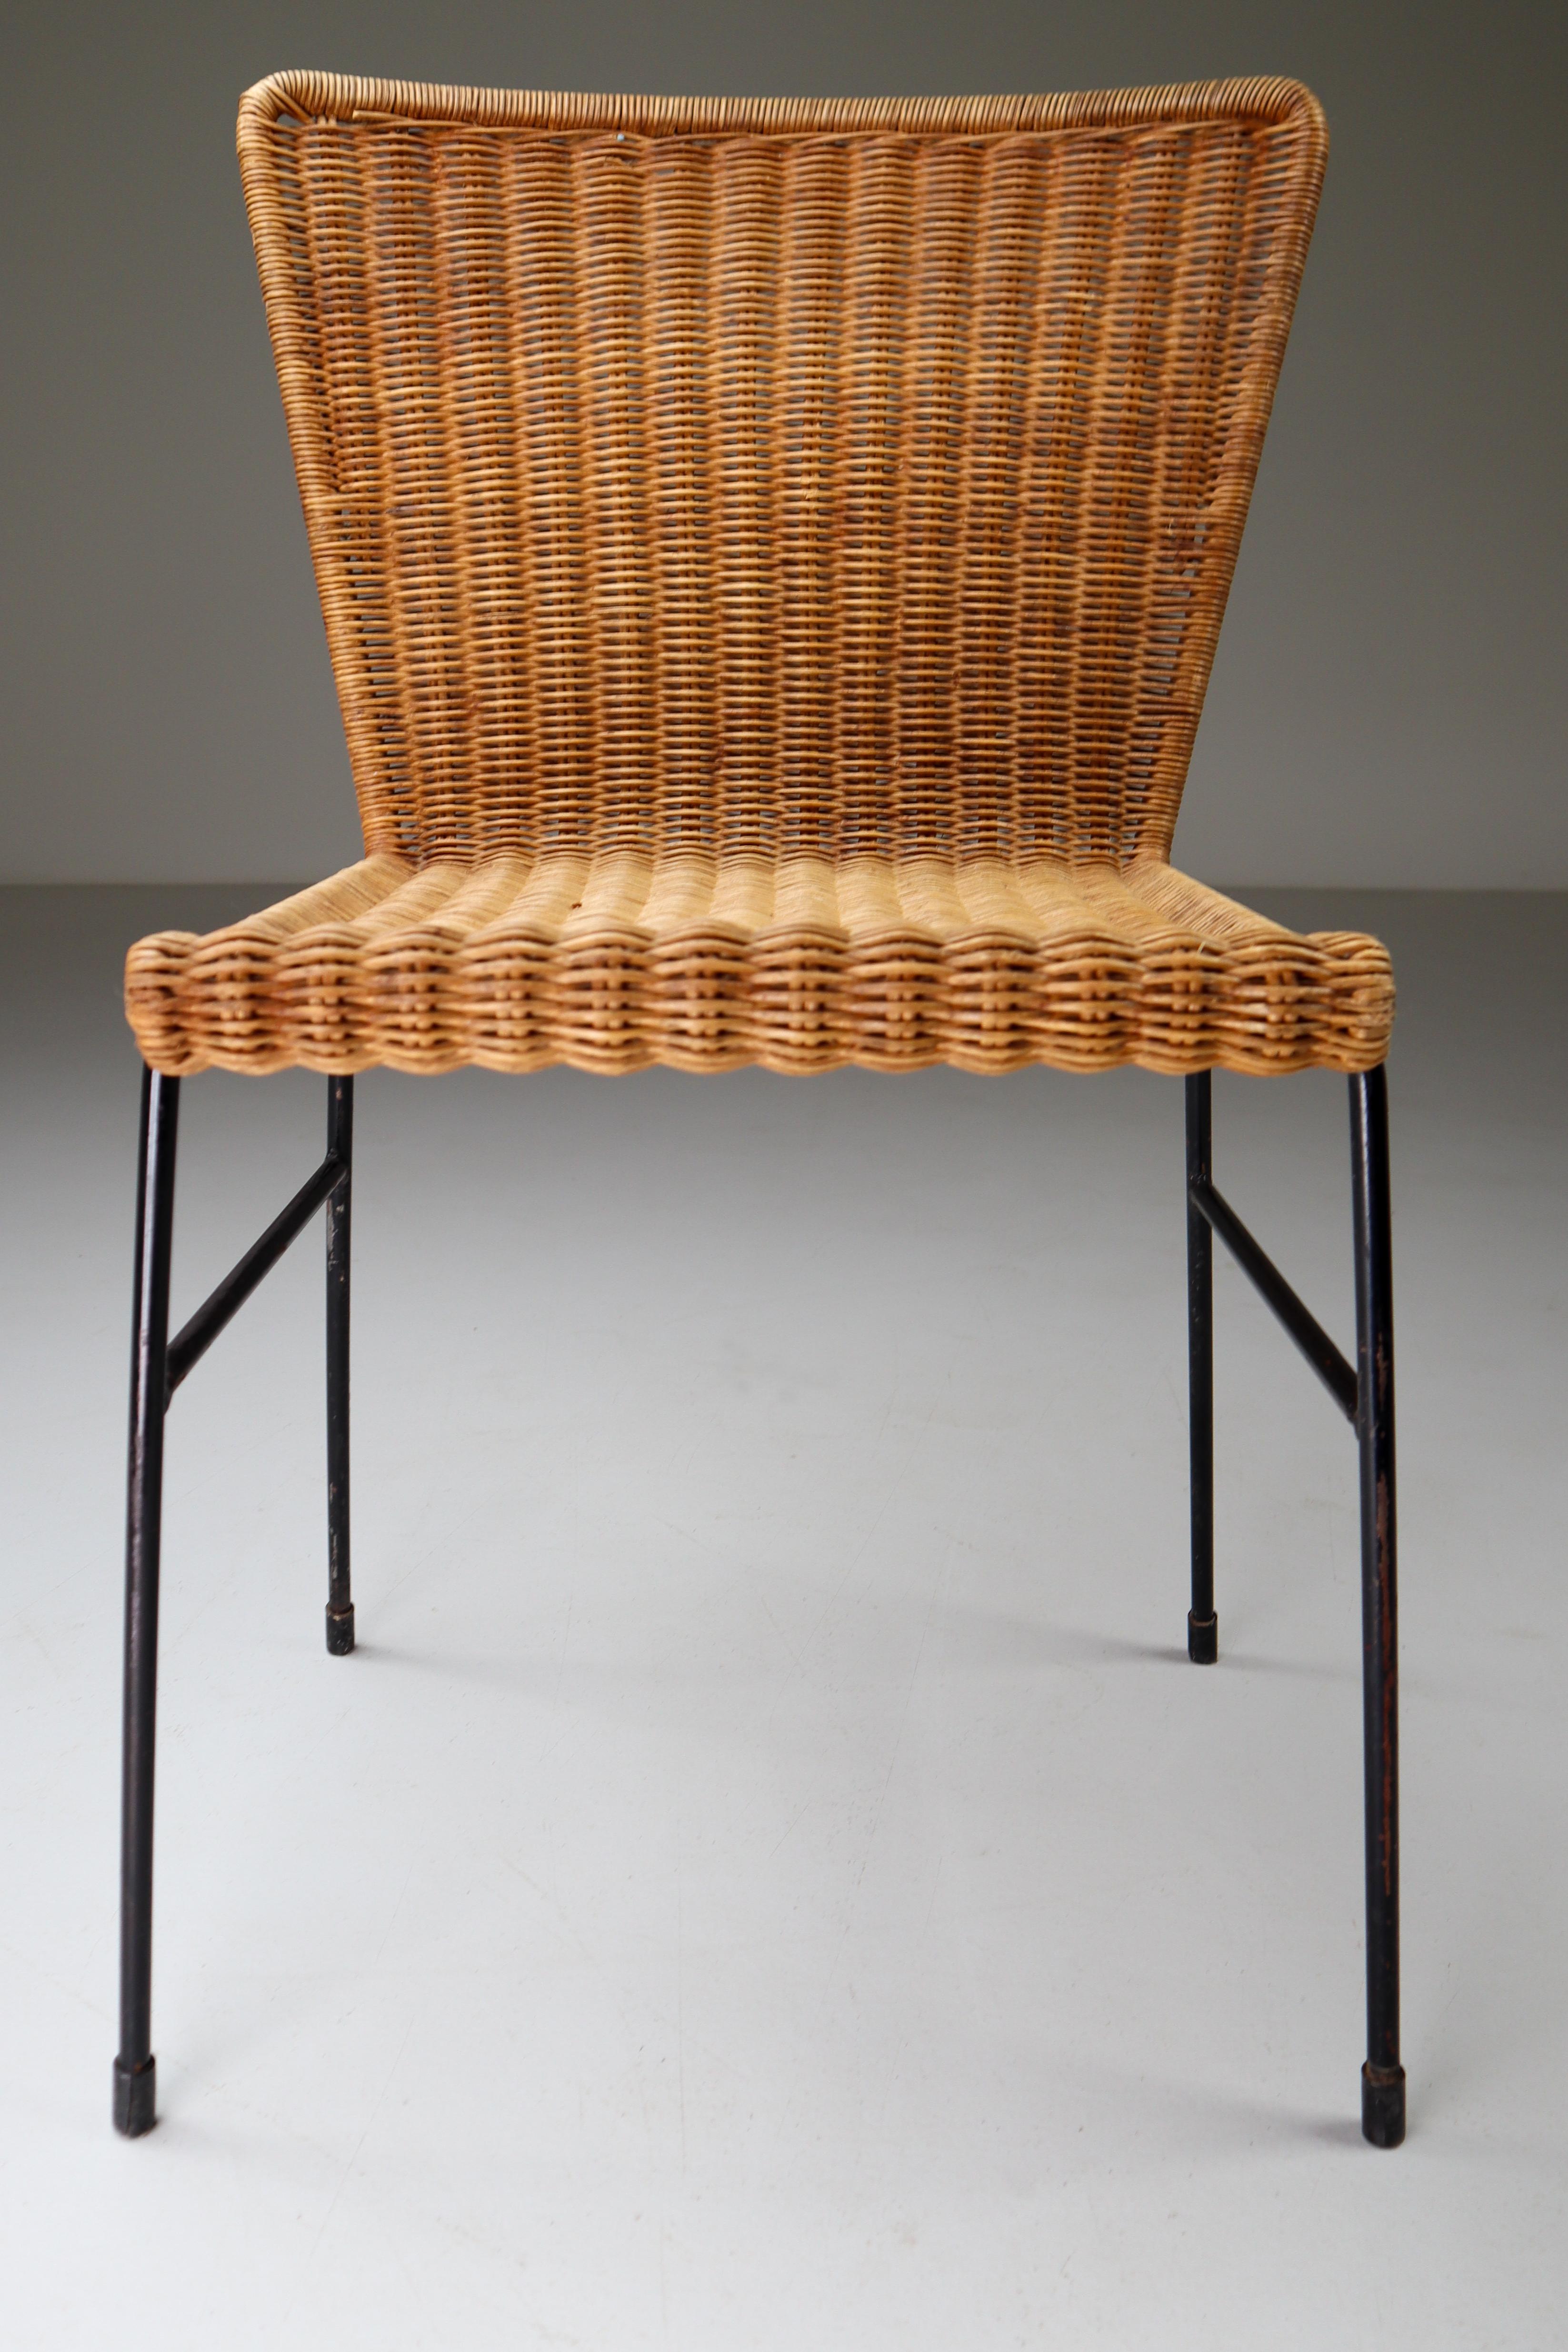 20th Century Patinated Metal Framed chairs with Woven Wicker Seat, The Netherlands, 1950